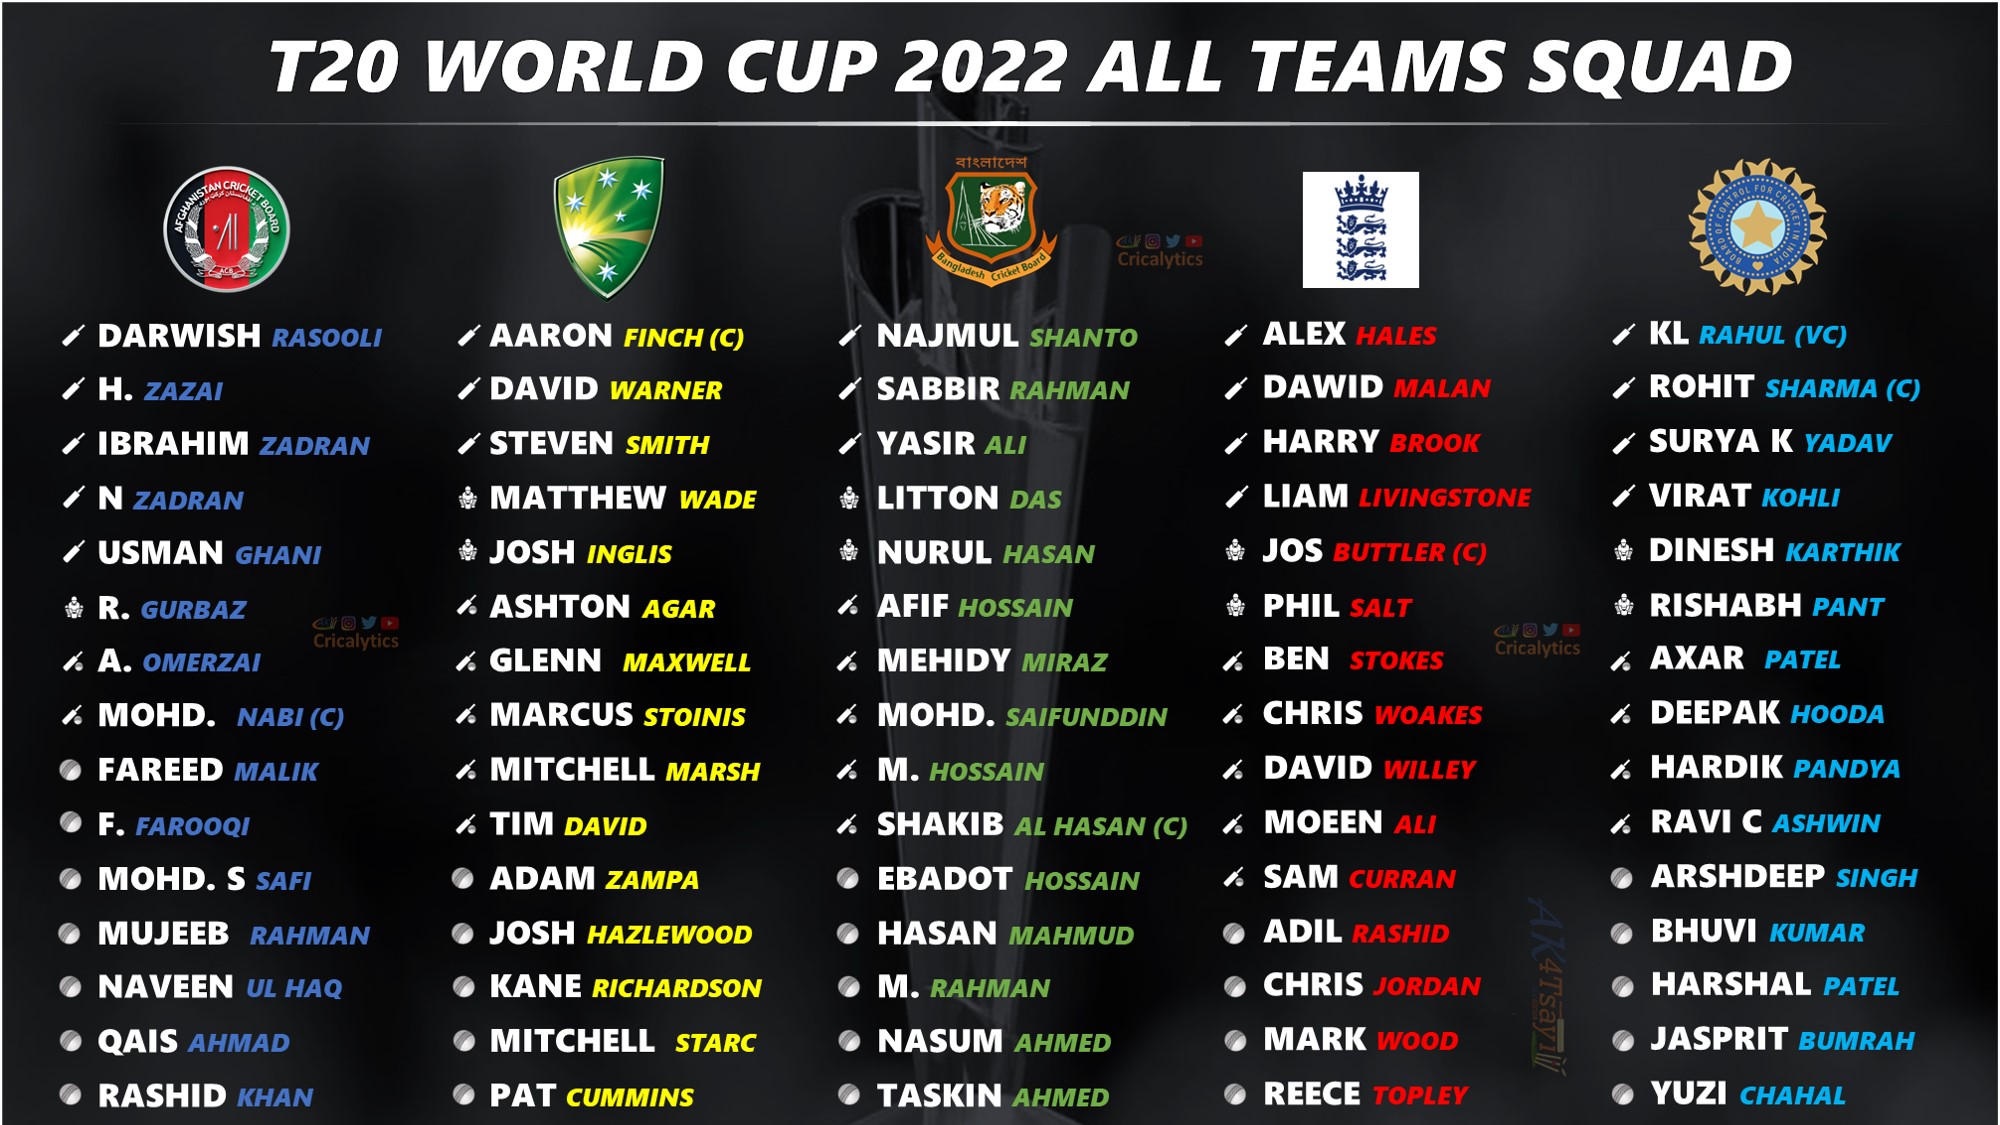 Final Squad Players List for All 16 Teams for T20 World Cup 2022